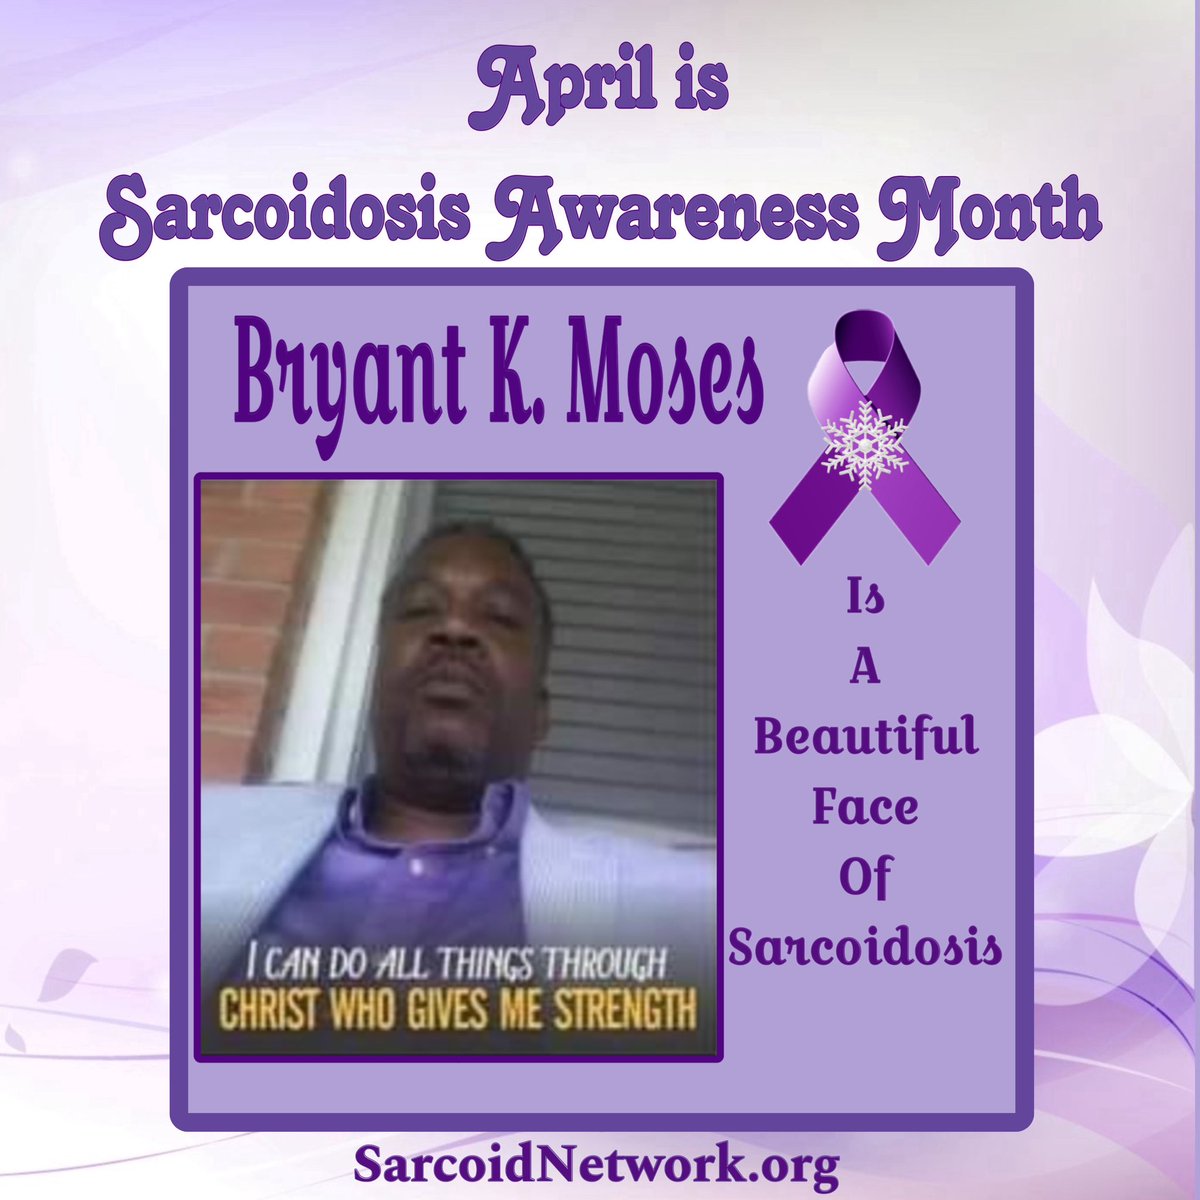 This is our Sarcoidosis Brother Bryant K. Moses and he is a Beautiful Face of Sarcoidosis!💜

#Sarcoidosis #raredisease #patientadvocate #sarcoidosisadvocate #beautifulfacesofsarcoidosis #sarcoidosisawarenessmonth